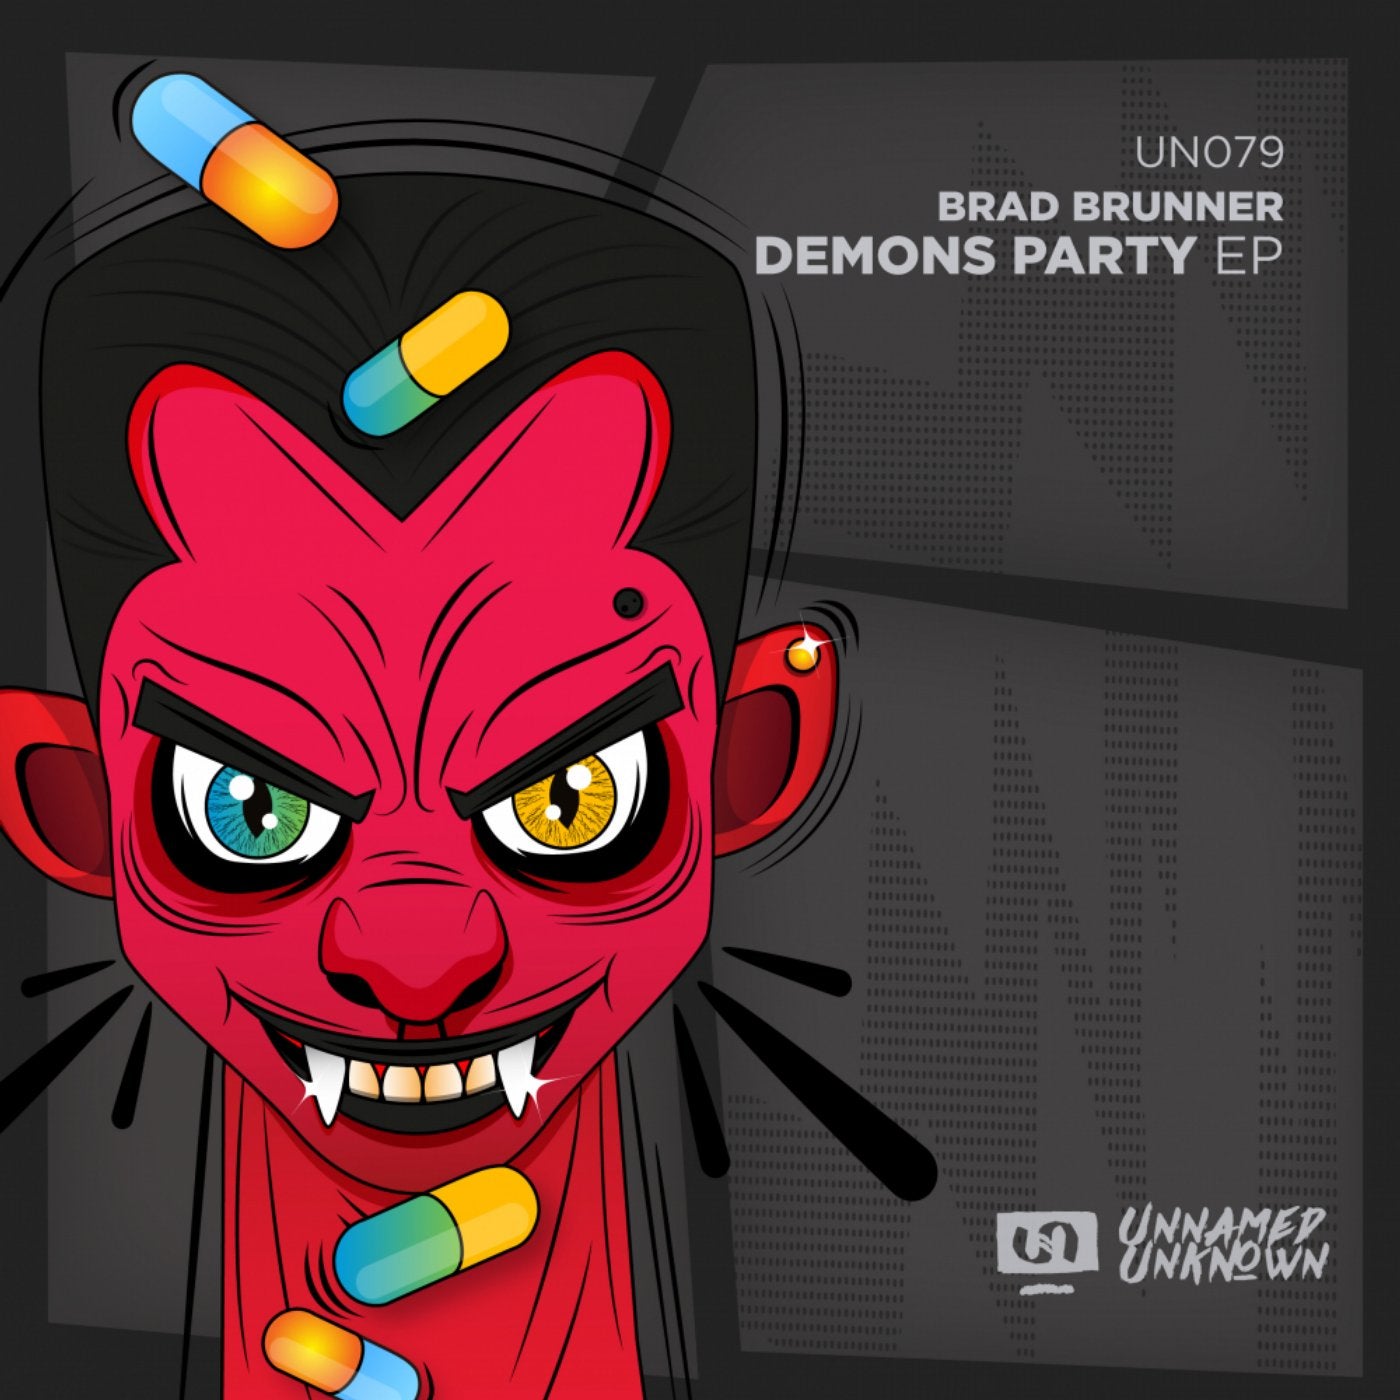 Demons Party